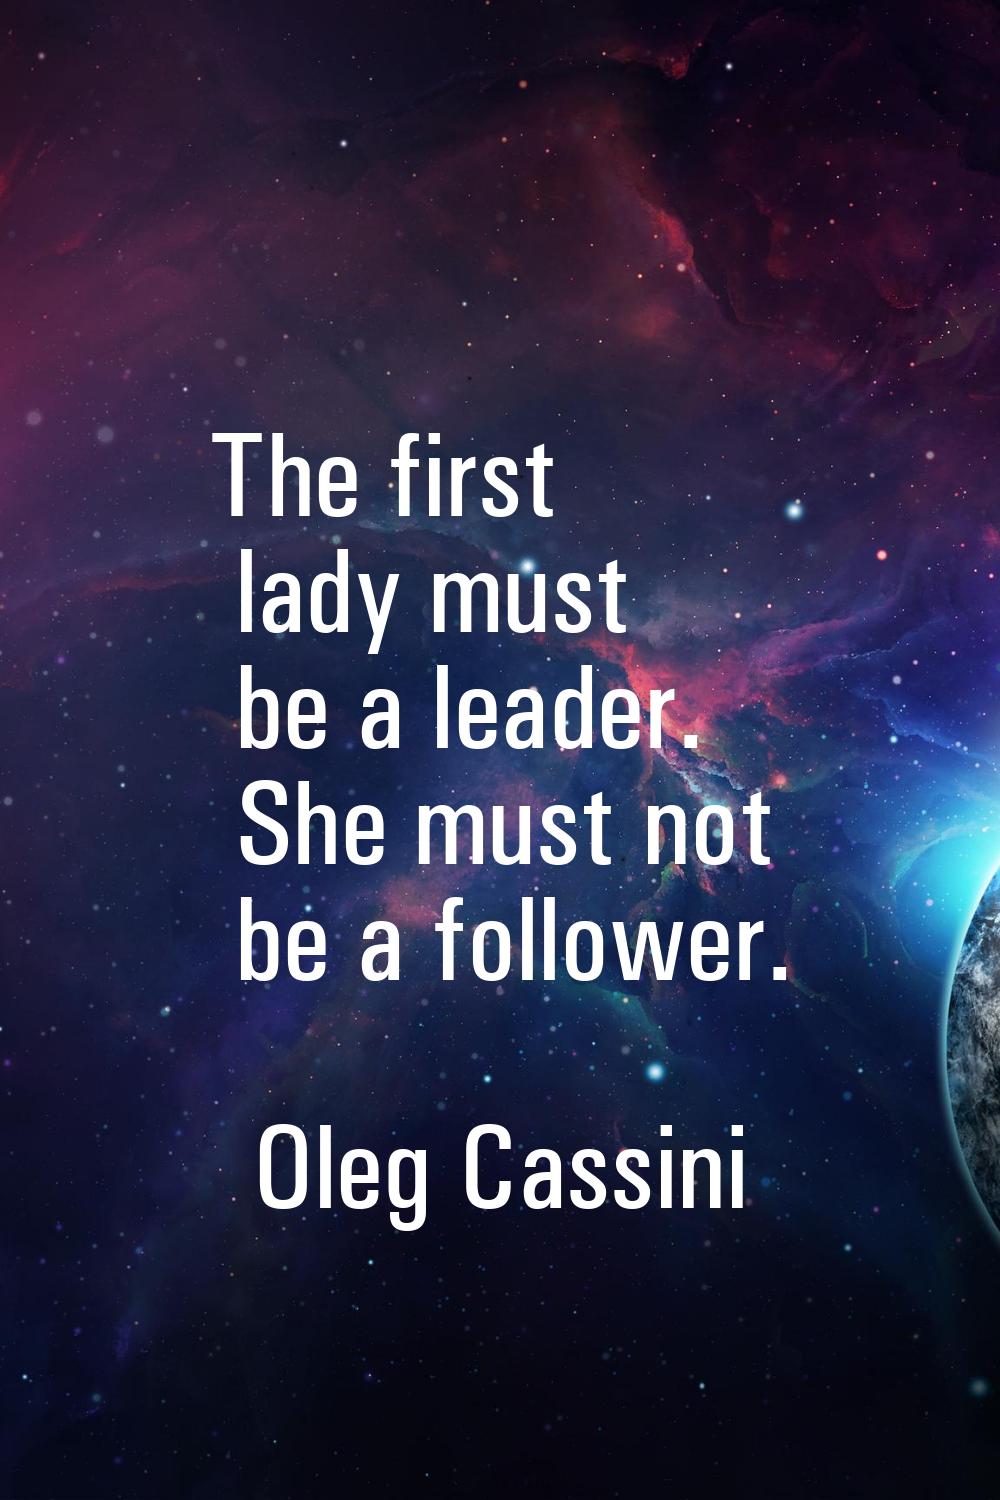 The first lady must be a leader. She must not be a follower.